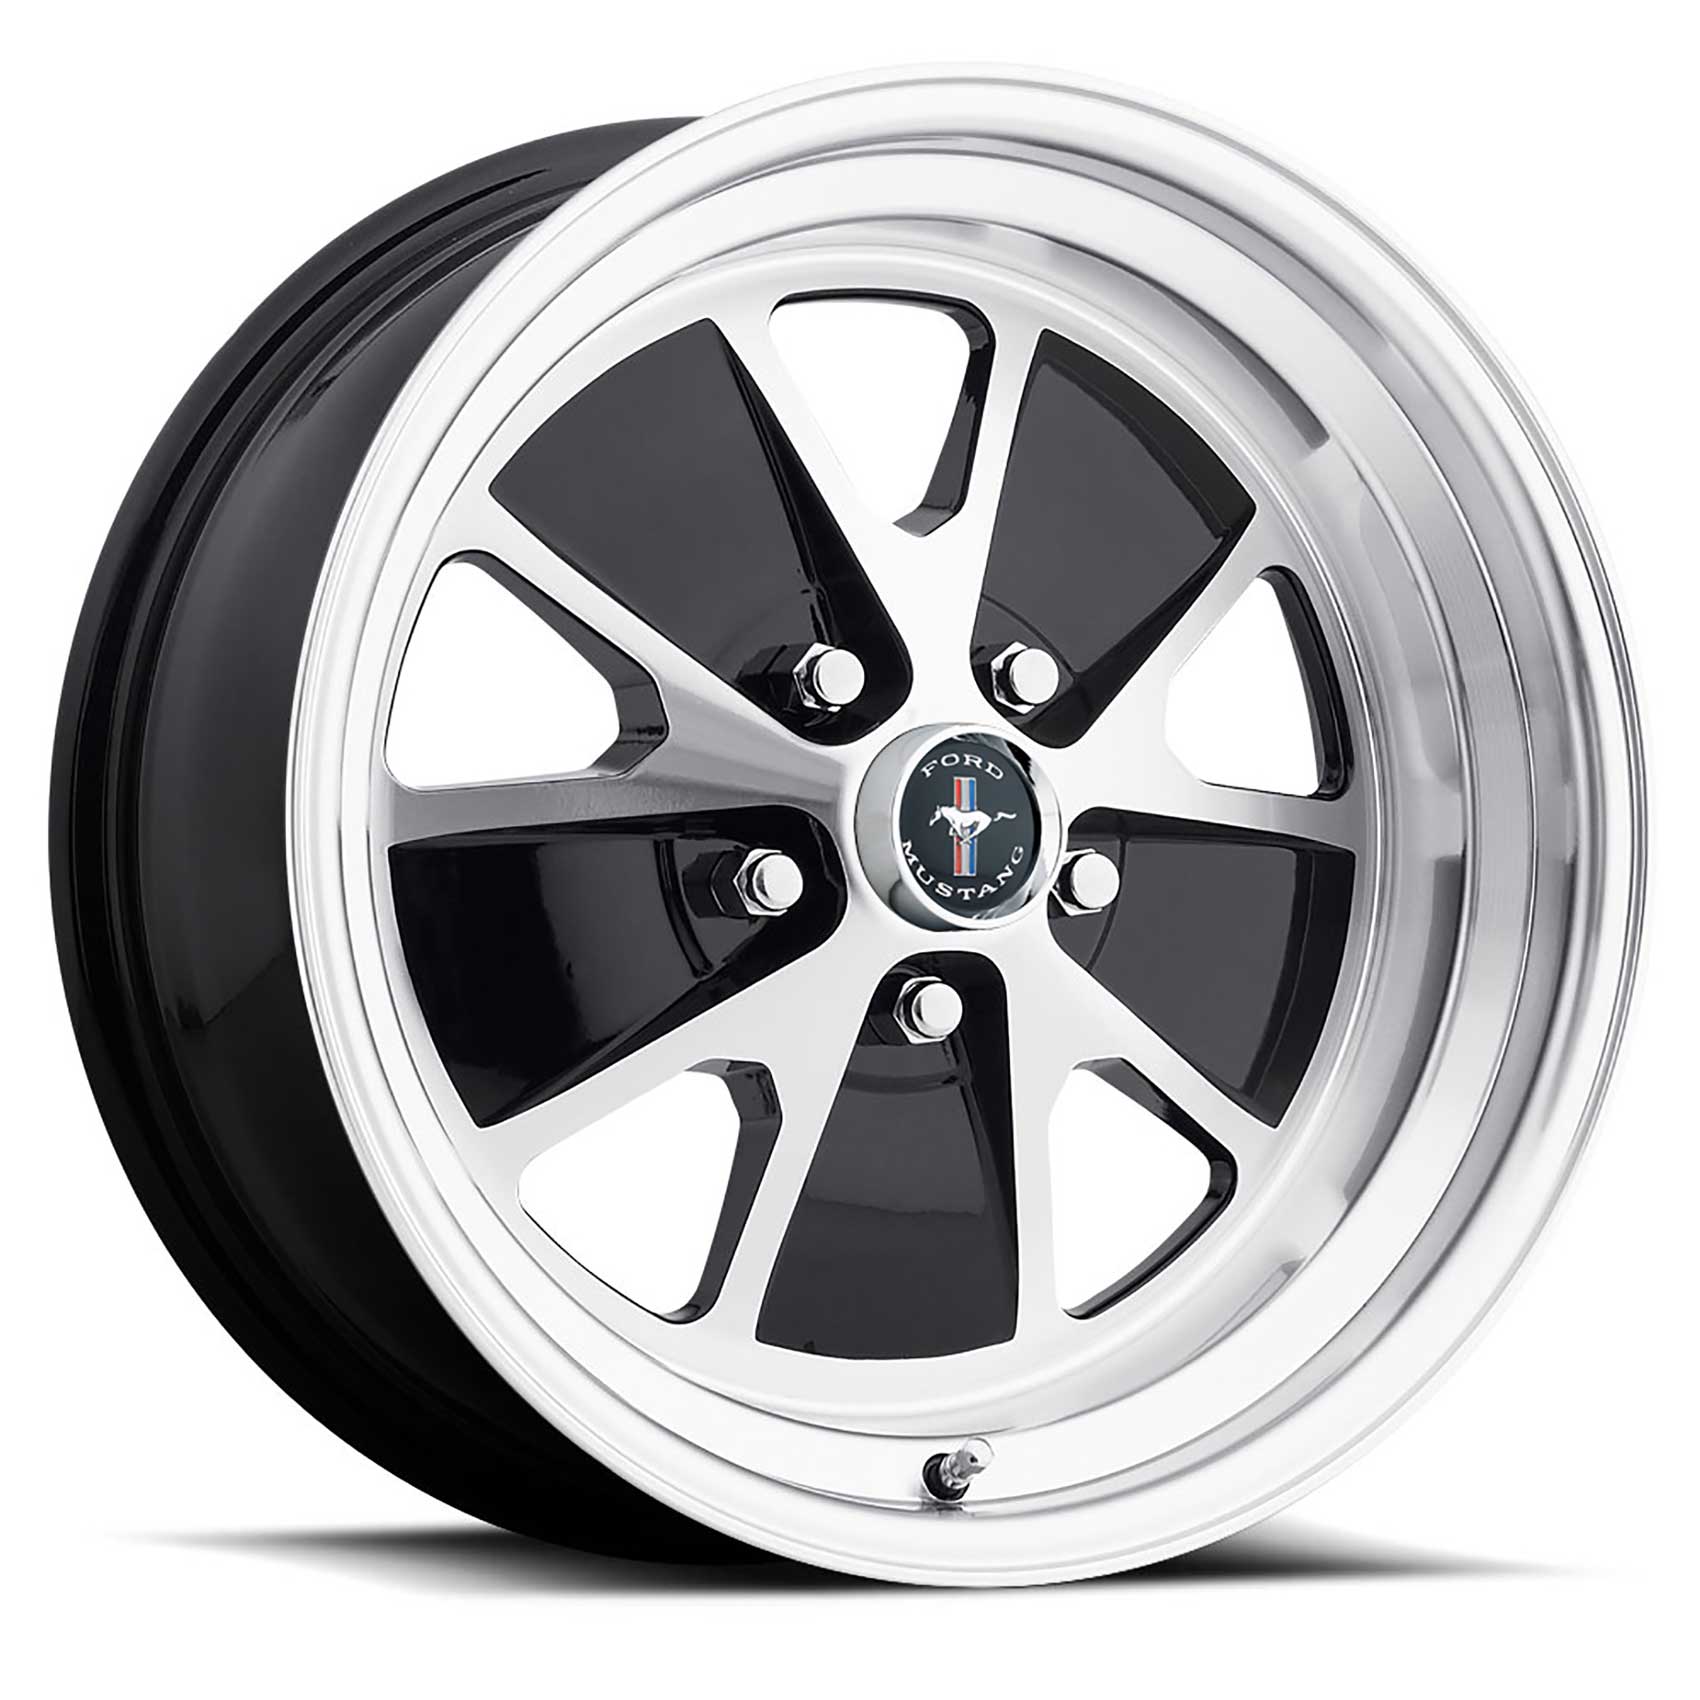 17 x 7 Legendary Styled Aluminum Alloy Wheel with Gloss Black and Machined Finish 5 x 45 Bolt Pattern